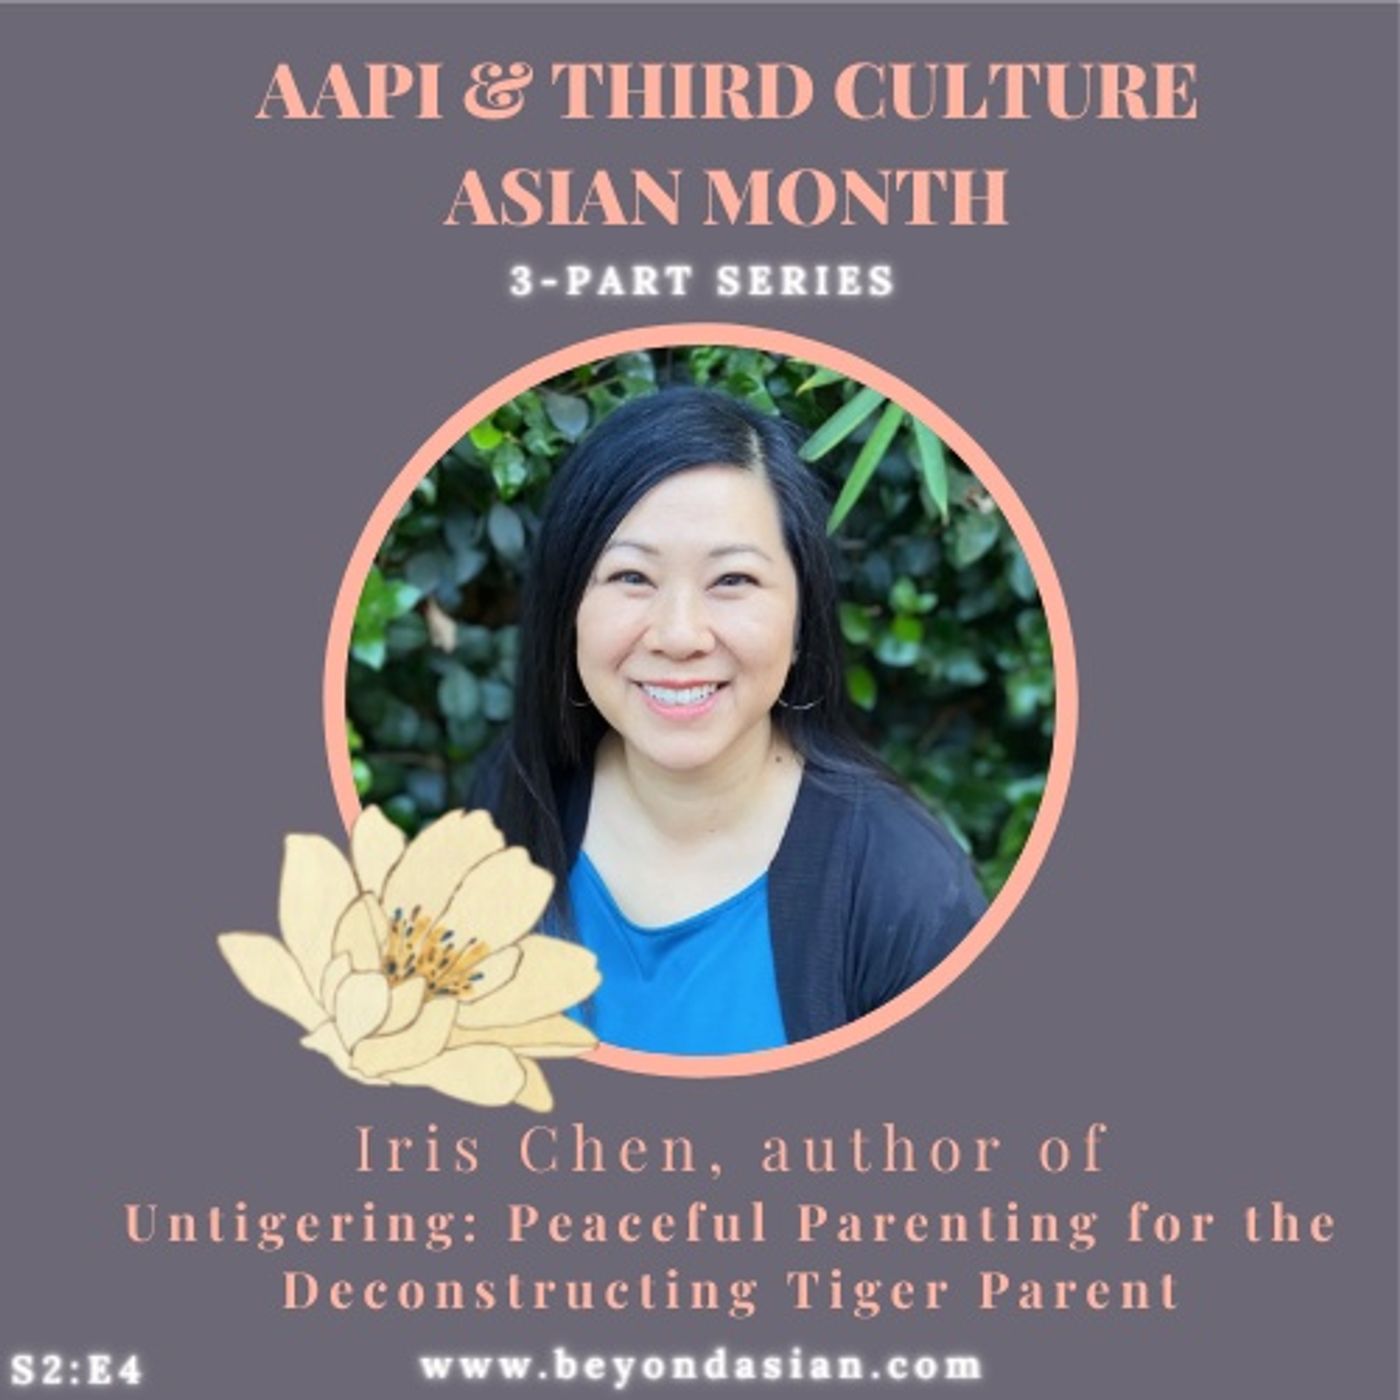 S2 | E4 - Iris Chen, author of "Untigering: Peaceful Parenting for the Deconstructing Tiger Parent" (AAPI & TCA Month 3-part series)